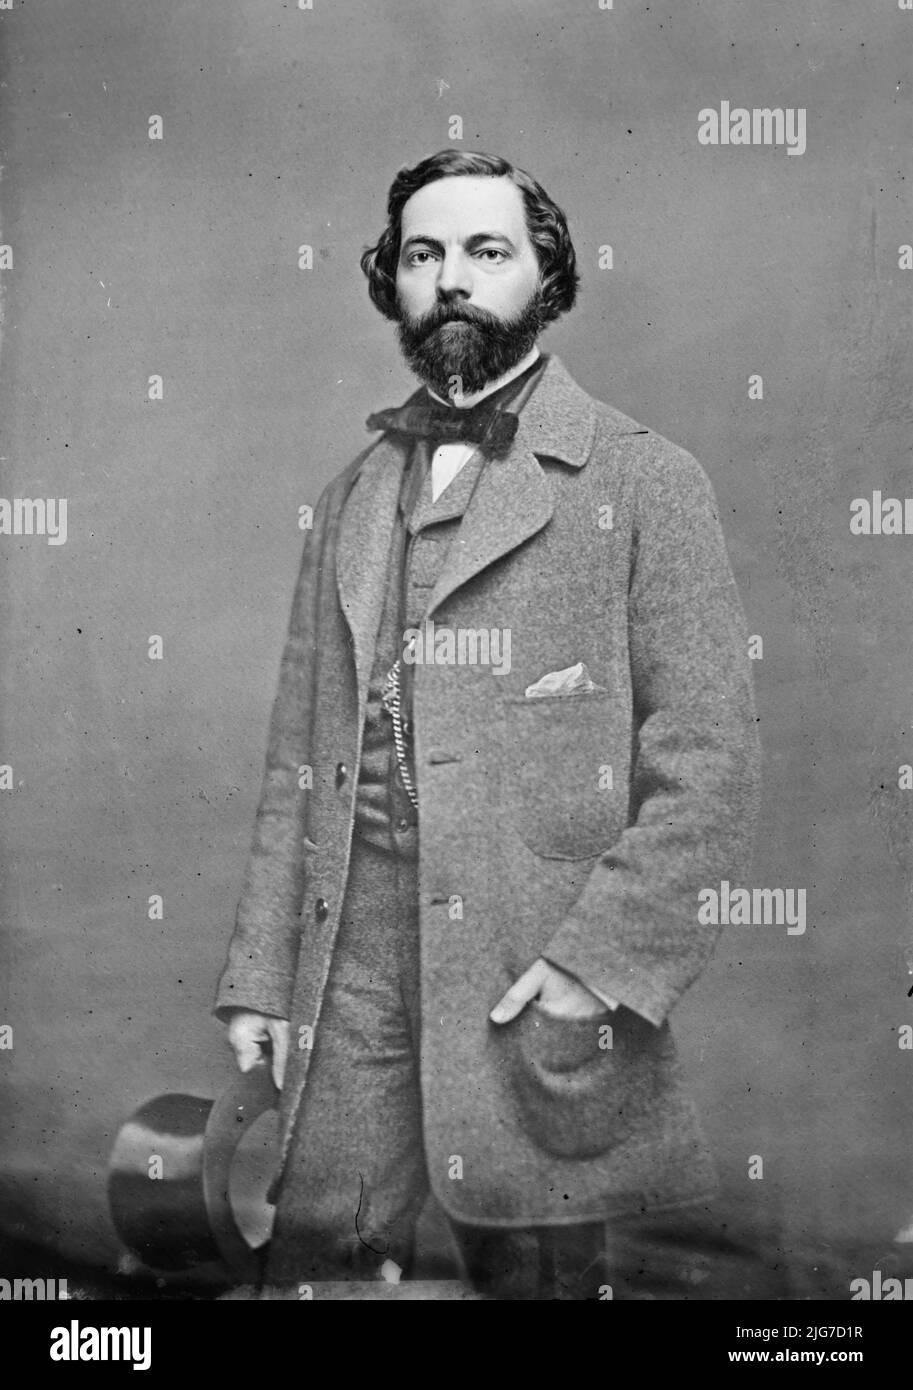 Hon. Wm. P. Miles of S.C., between 1855 and 1865. [Designed the most popular variant of the Confederate flag]. Stock Photo